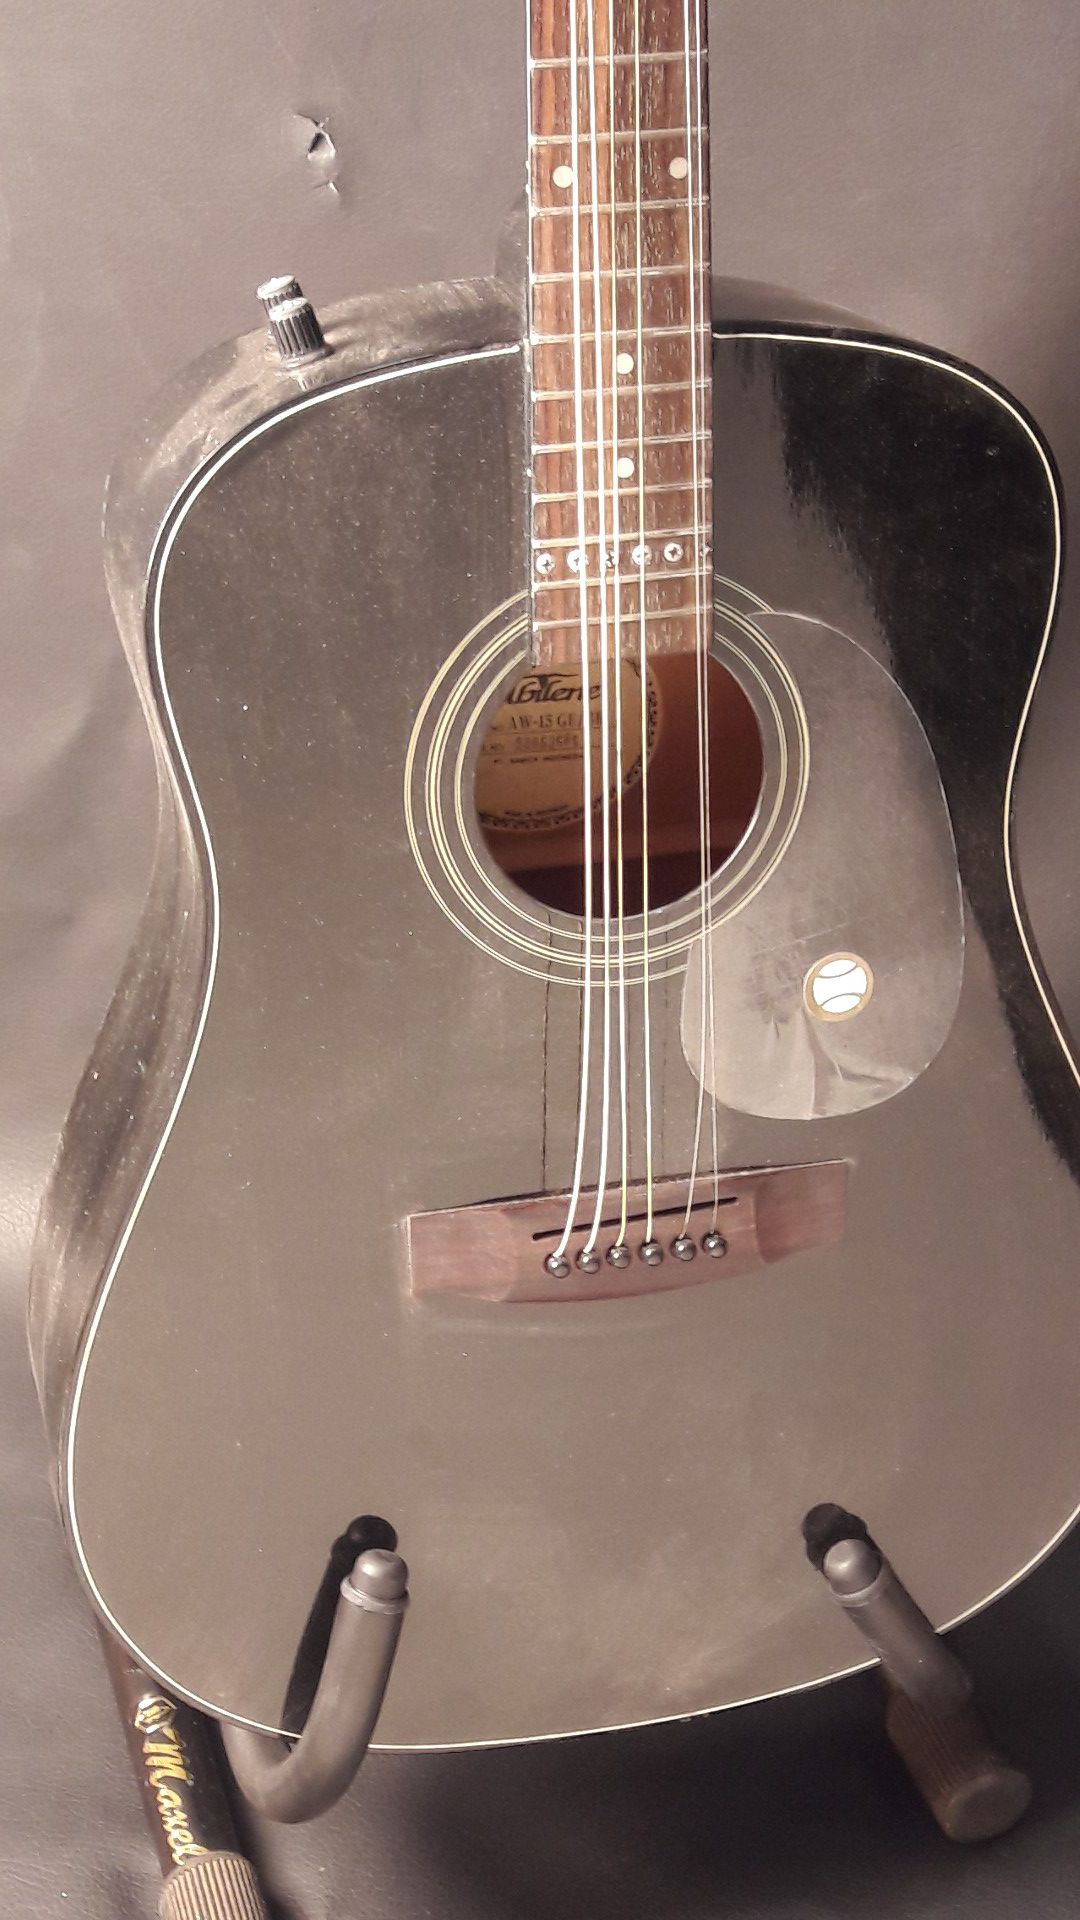 Abilene Acoustic Electric Guitar for project